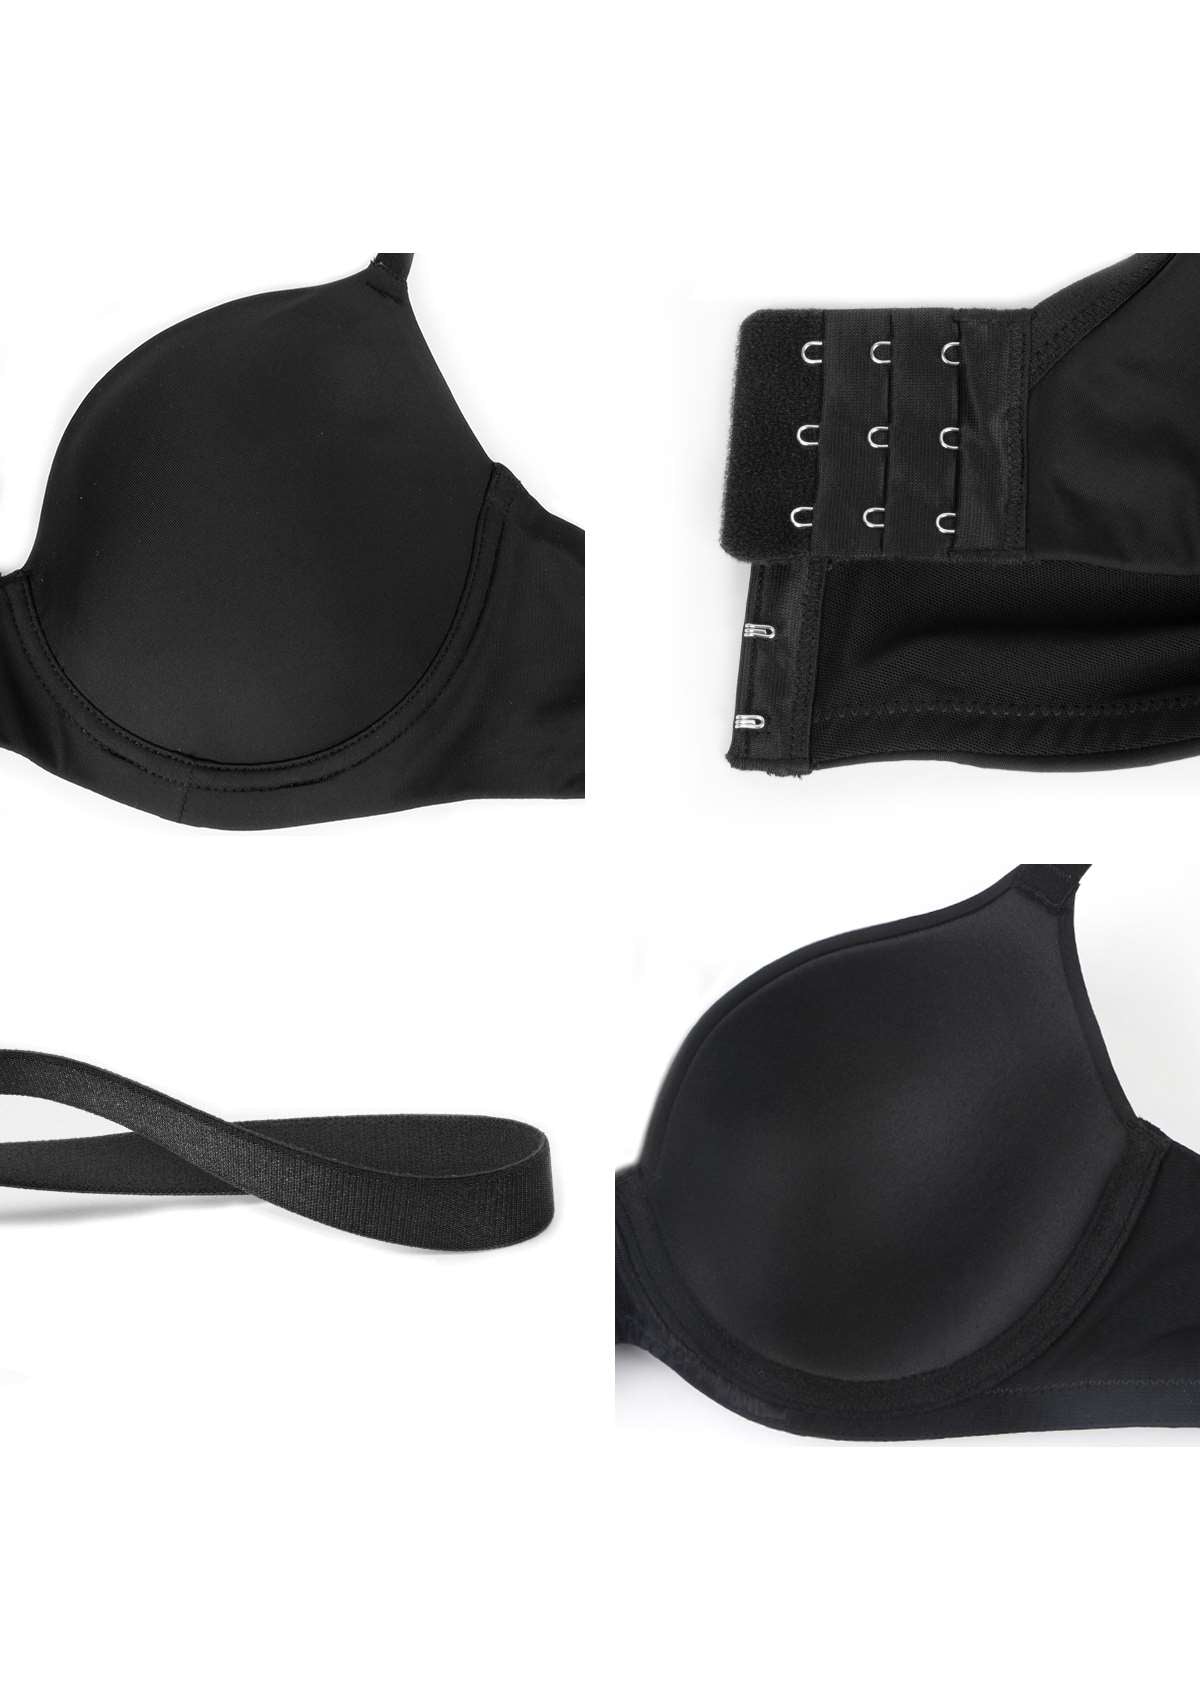 HSIA Gemma Smooth Padded T-shirt Everyday Bras - For Lift And Comfort - Black / 40 / DD/E